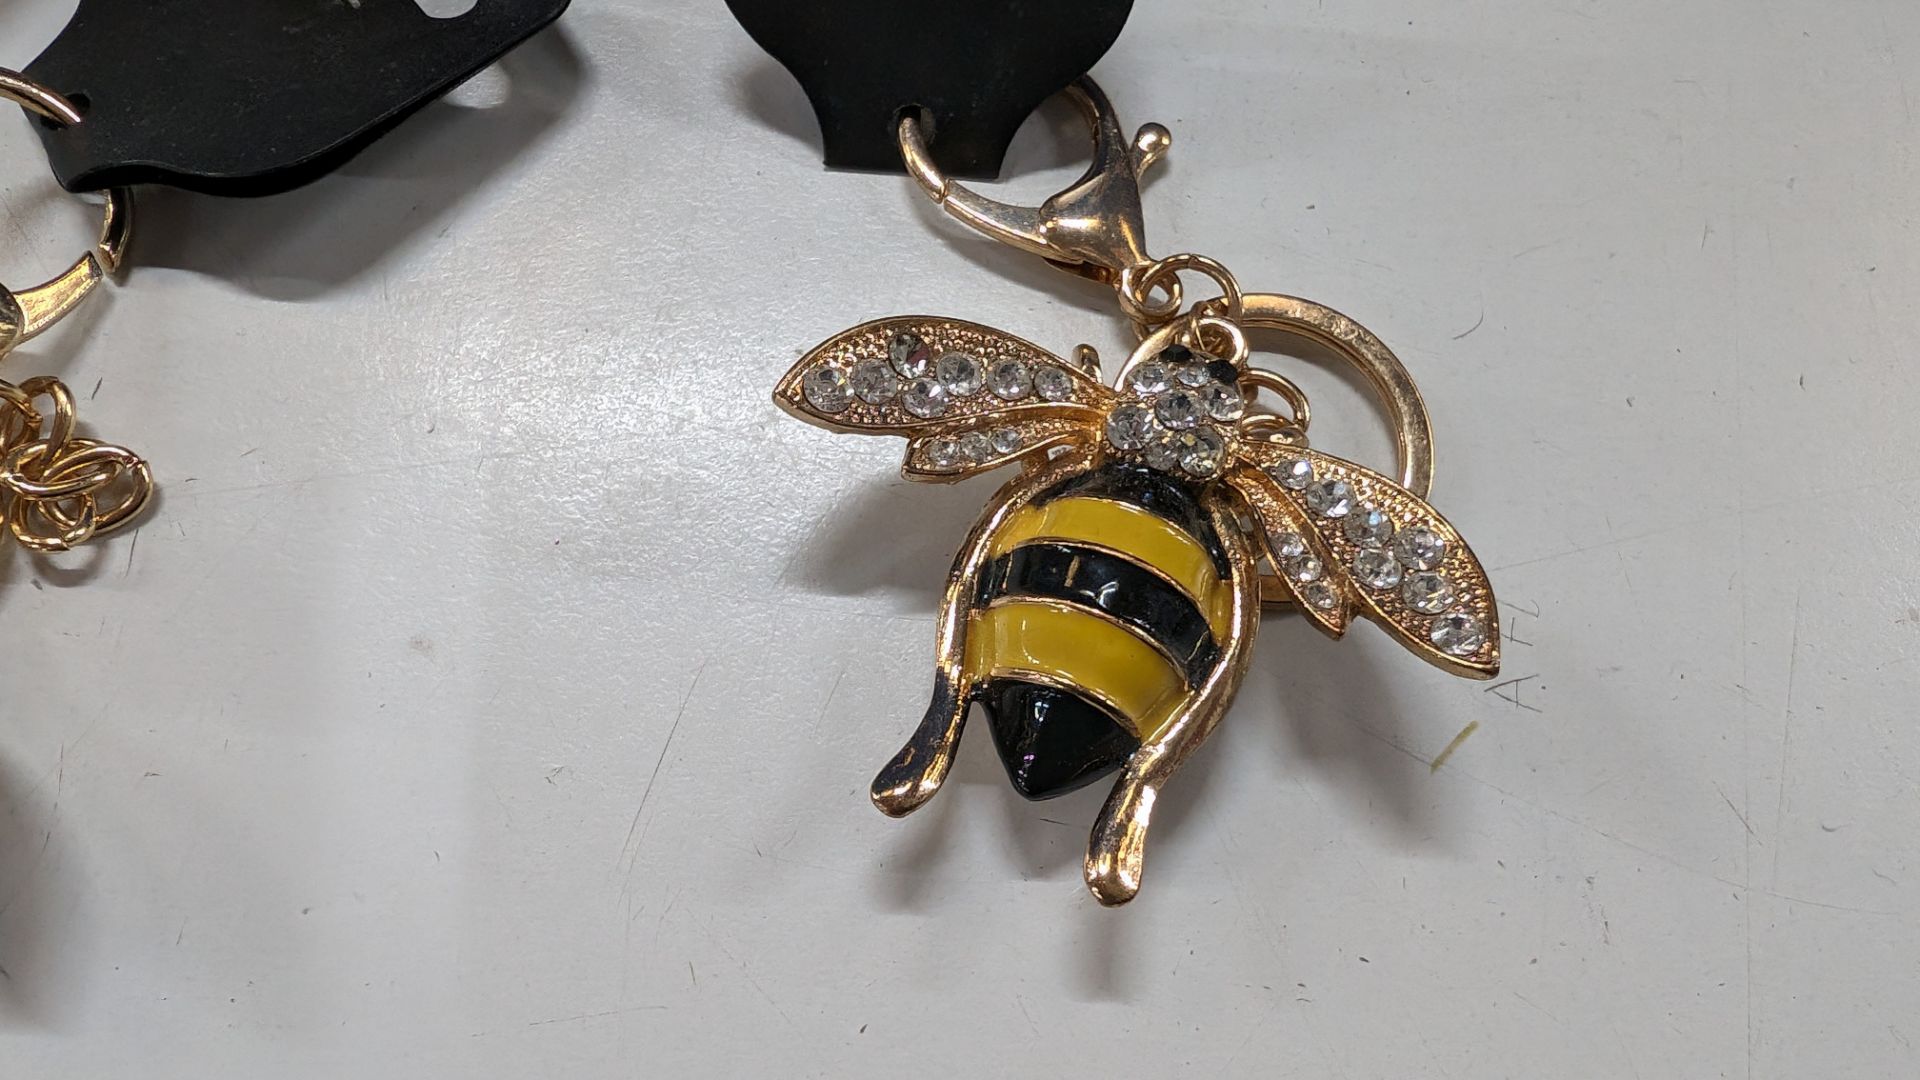 4 off highly decorative bee keyrings - Image 5 of 6